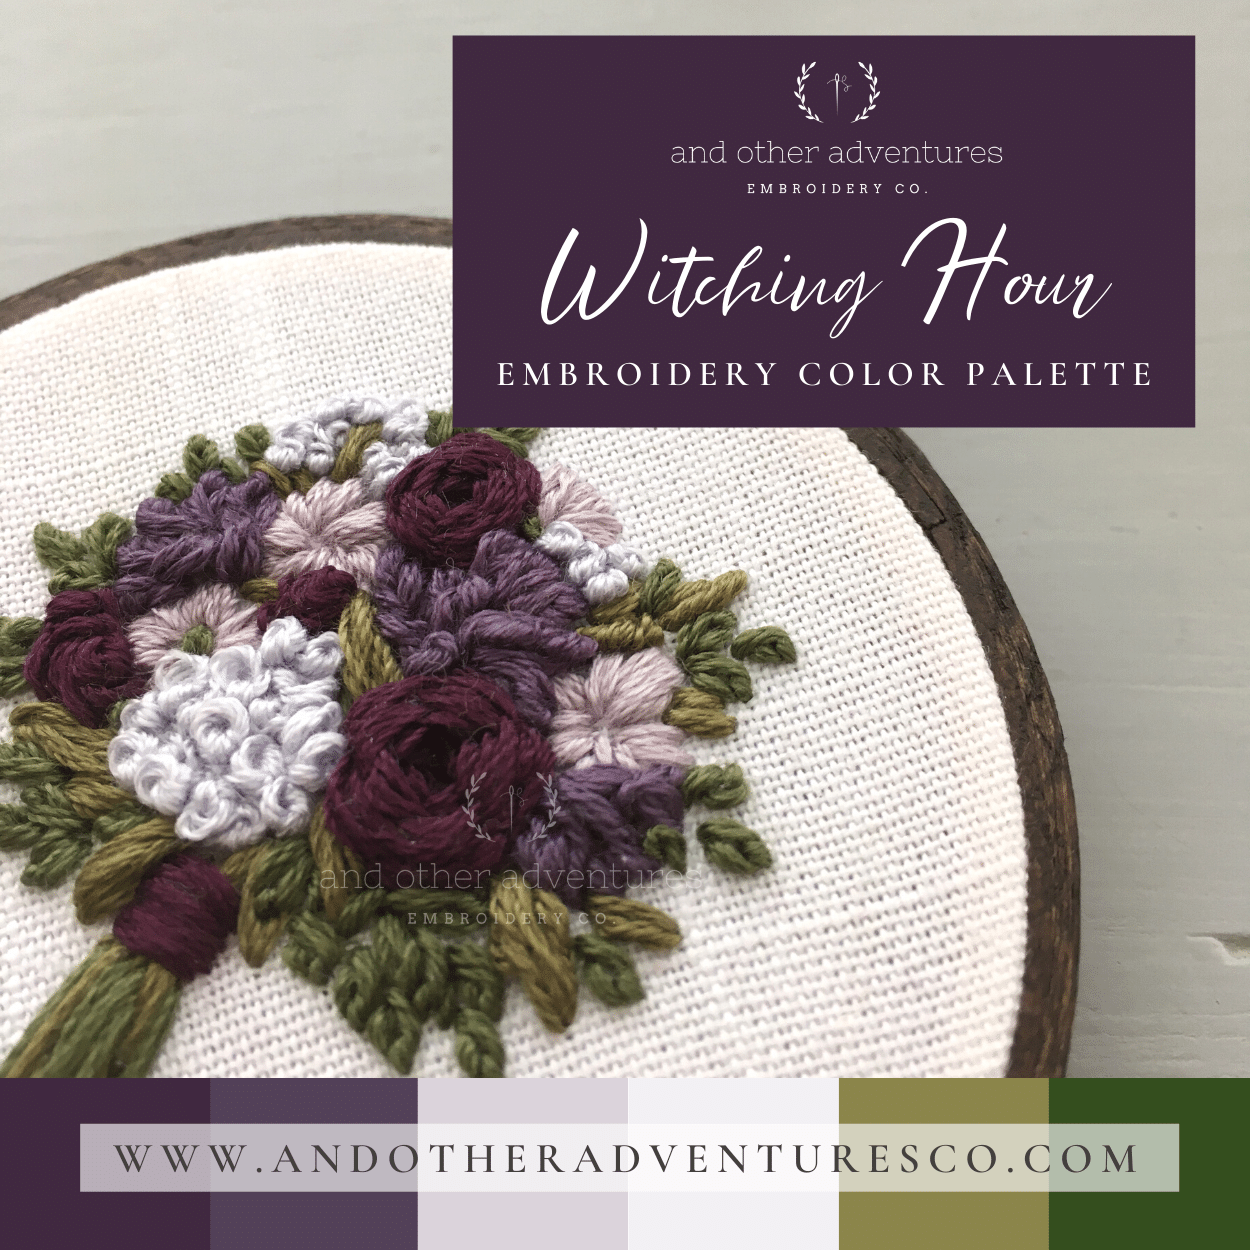 Witching Hour Embroidery Floss Color Palette | And Other Adventures Embroidery Co